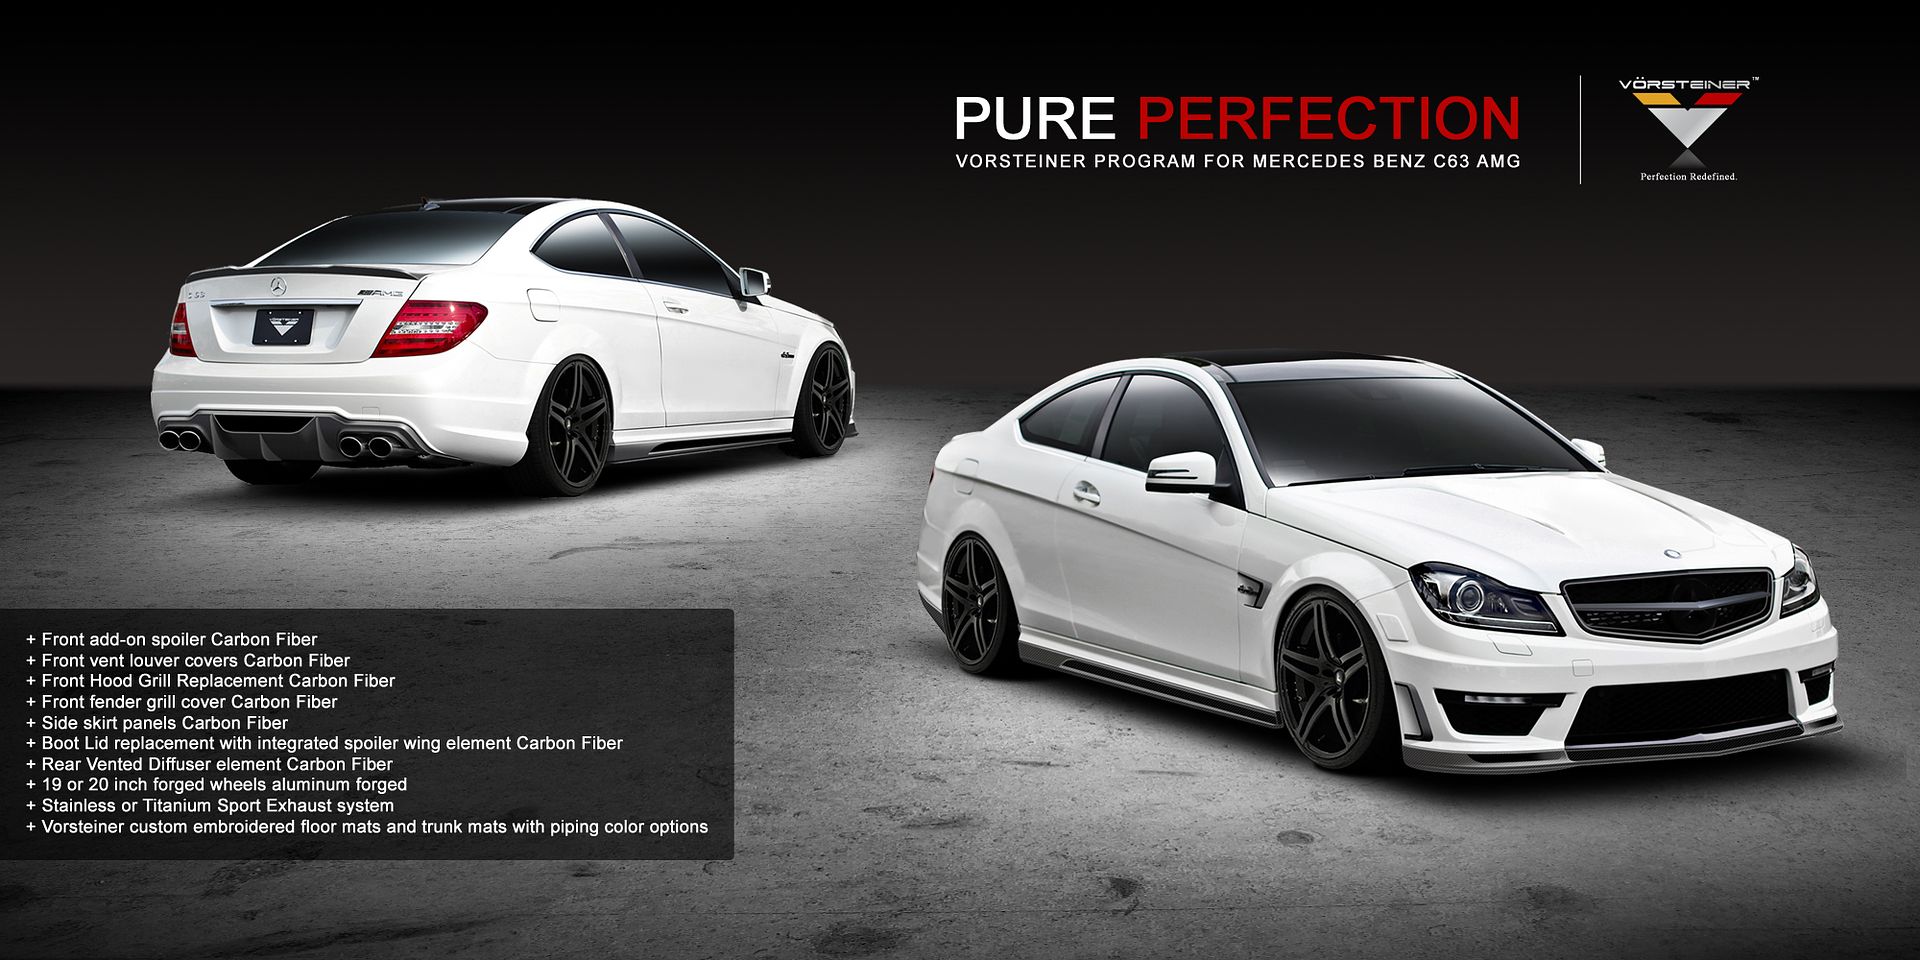 For more information about the C63 AMG program please contact our sales